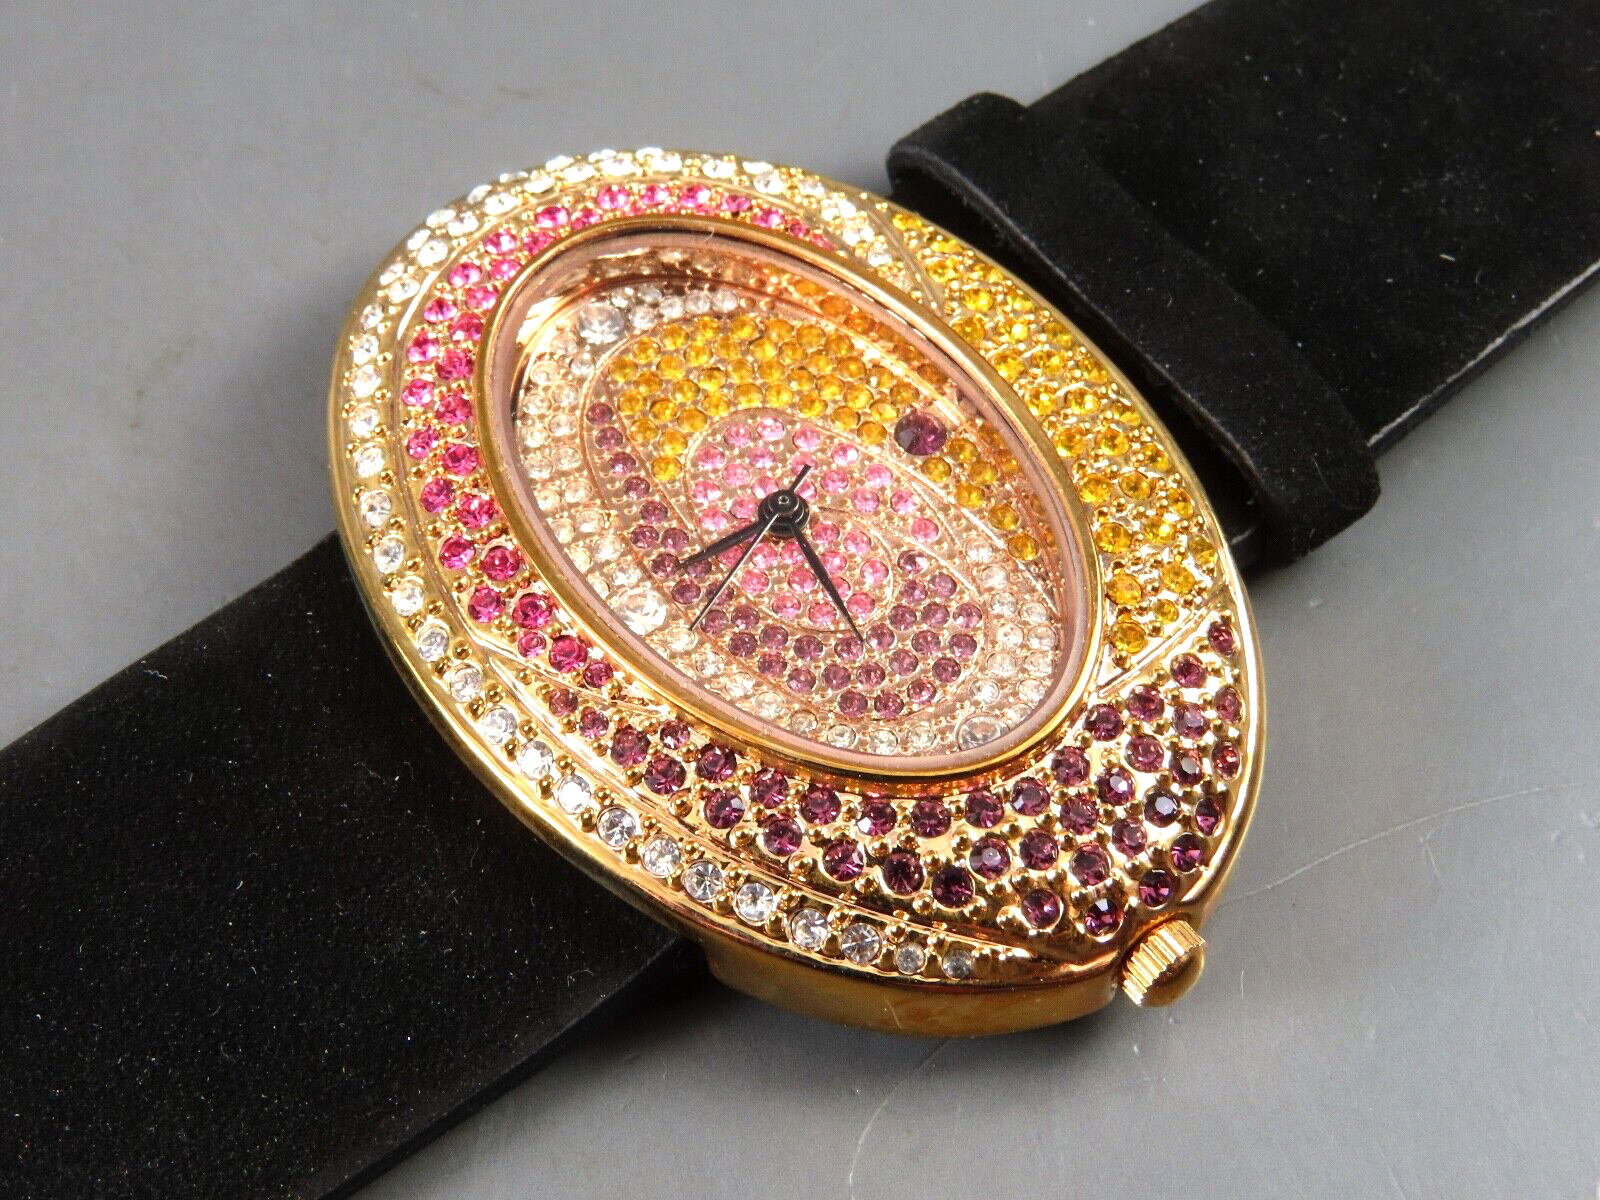 NEW NOS VTG Suzanne Somers PAVE CRYSTAL WRIST WATCH Black Suede PINK ROSE GOLD